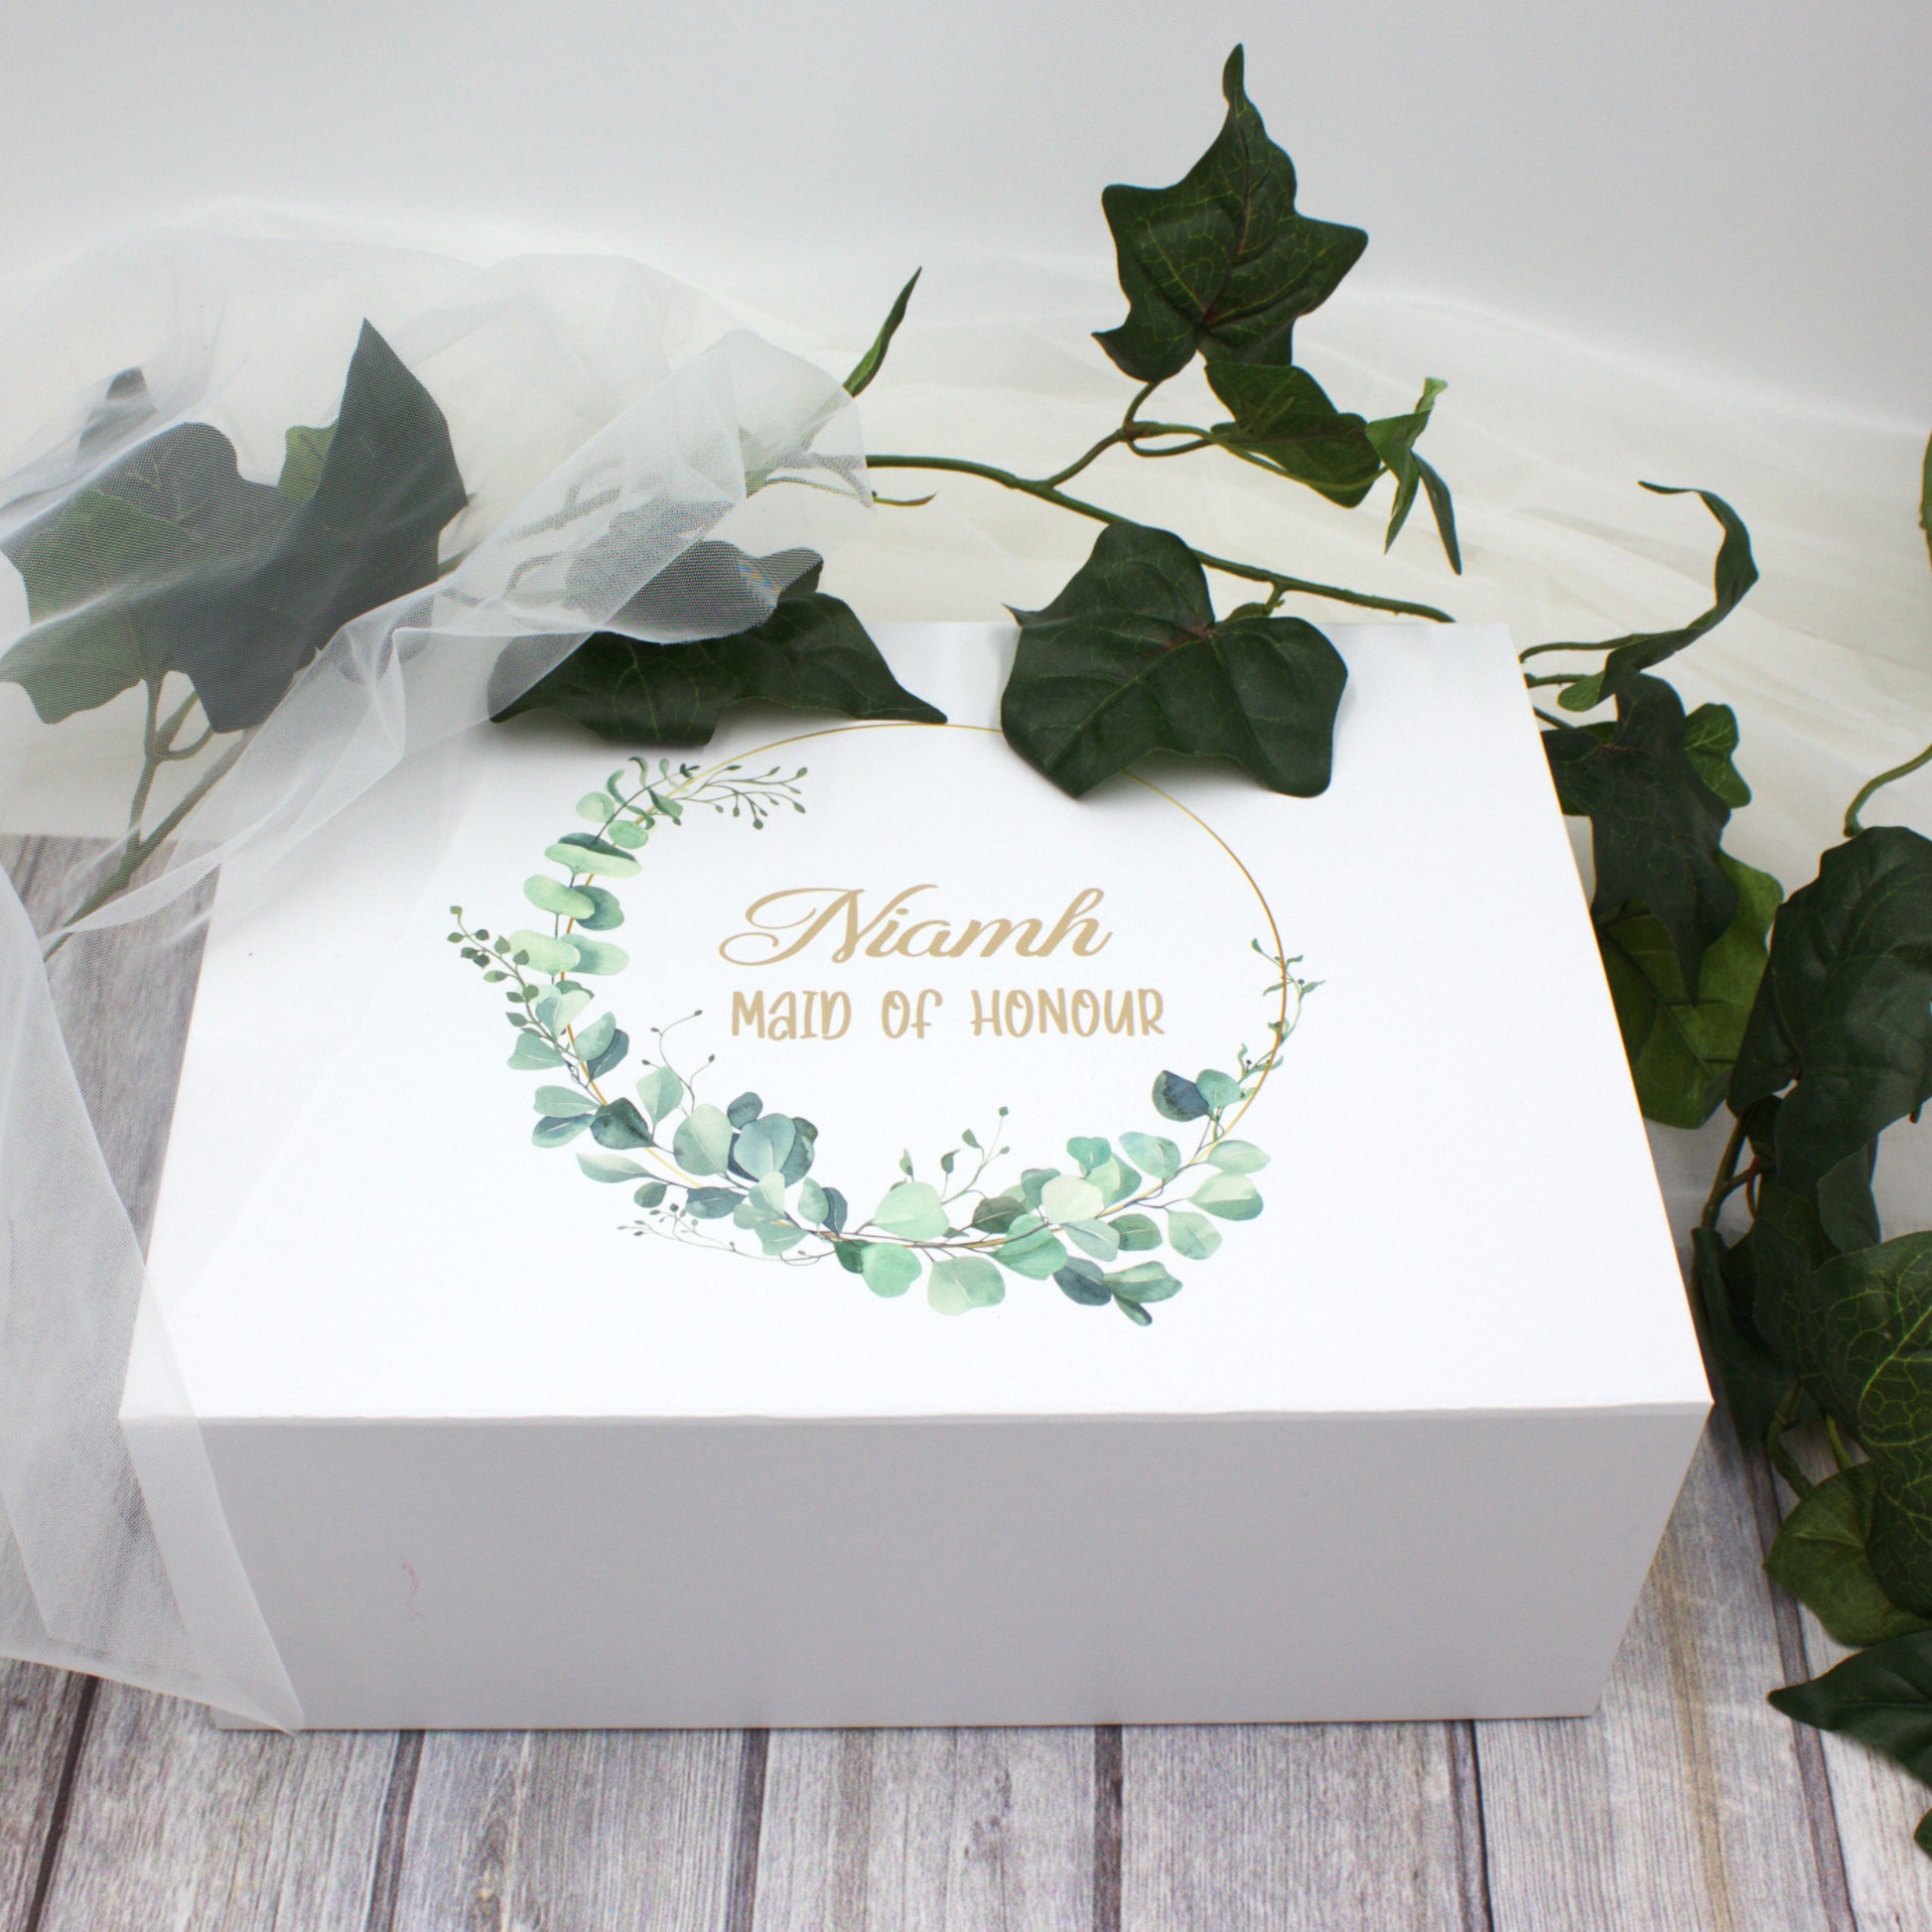 Heavenly scent gift set with white personalised luxury gift box with eucalyptus wreath design 